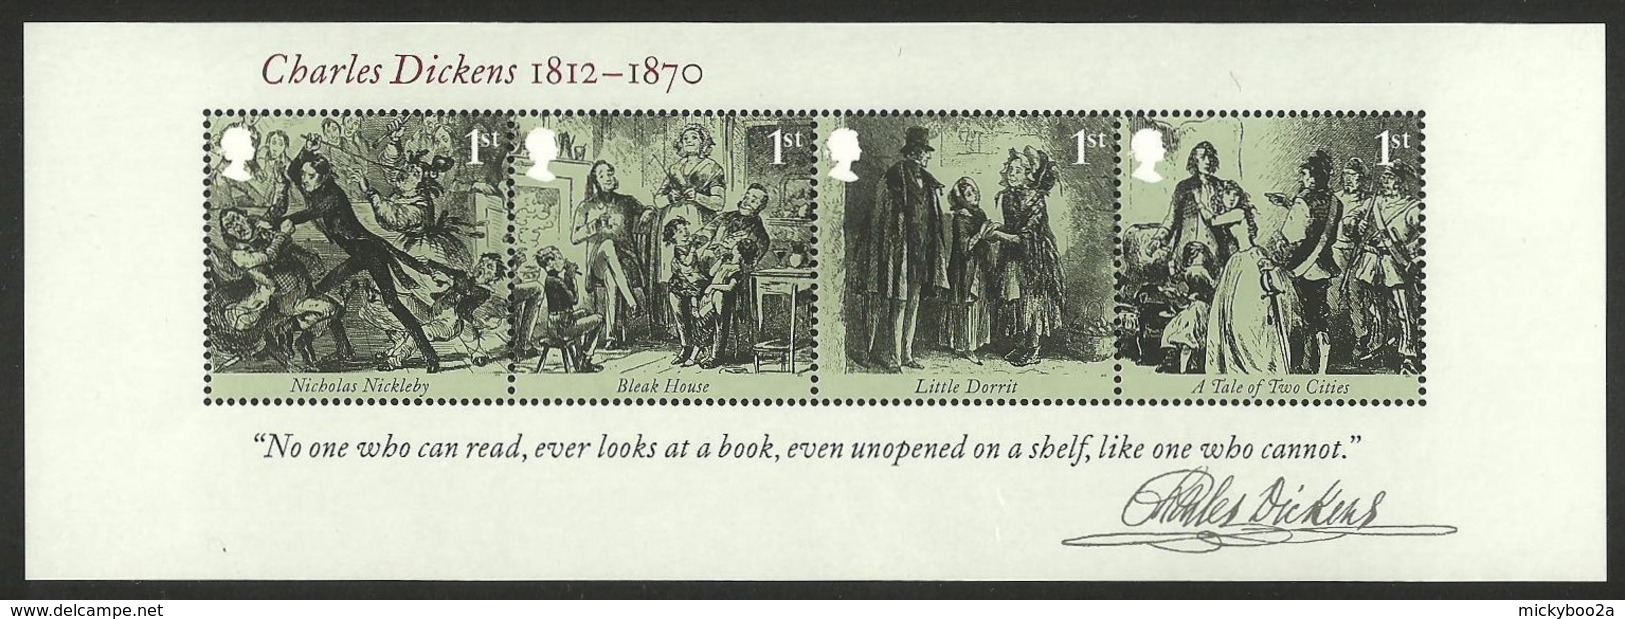 GB 2012 CHARLES DICKENS TALE OF TWO CITIES BLEAK HOUSE M/SHEET MNH - Nuevos